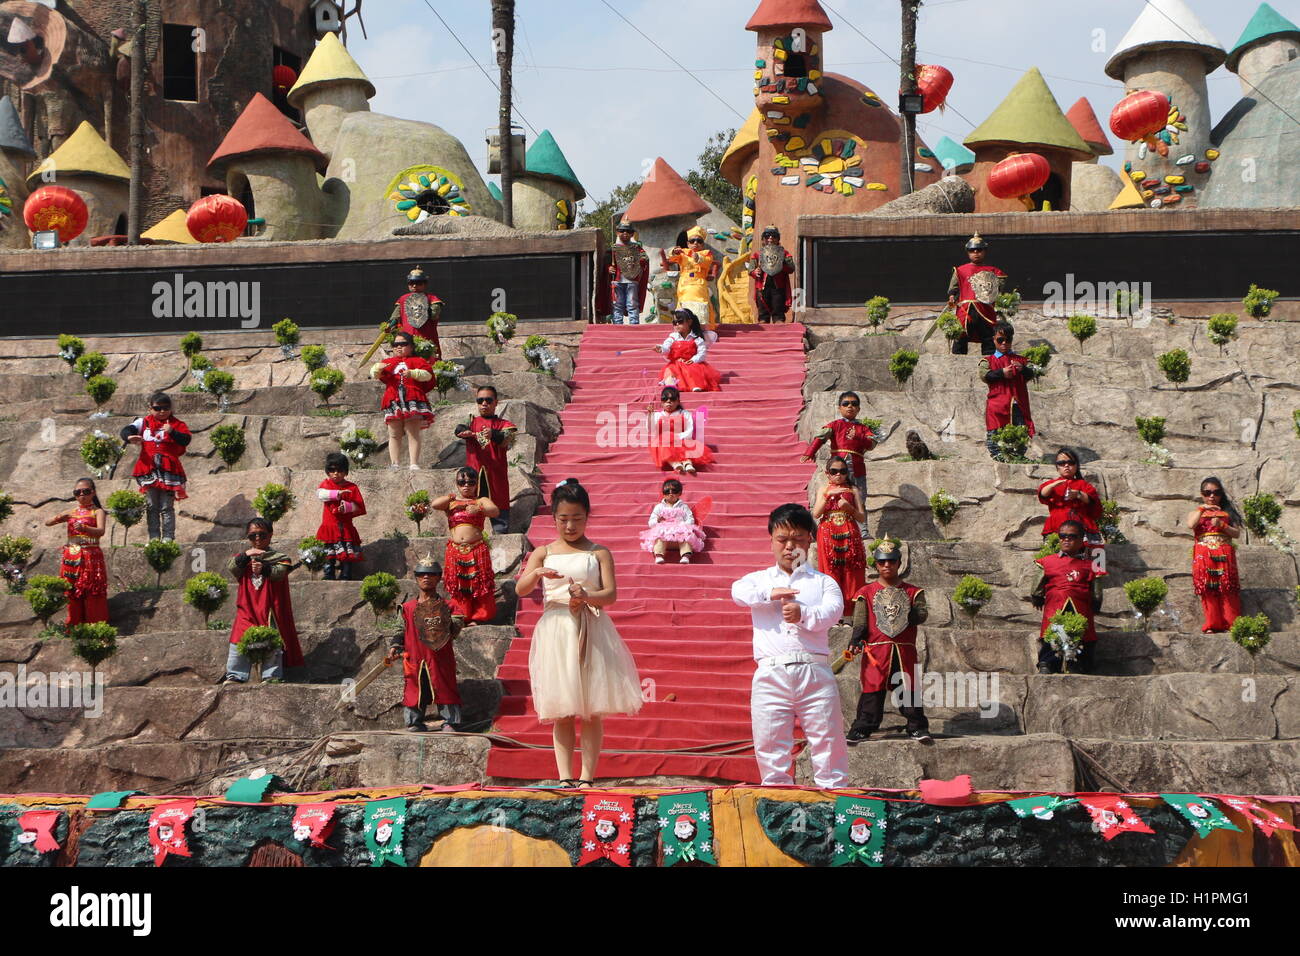 Performance at the Kingdom of the Little People - Kunming, China Stock Photo